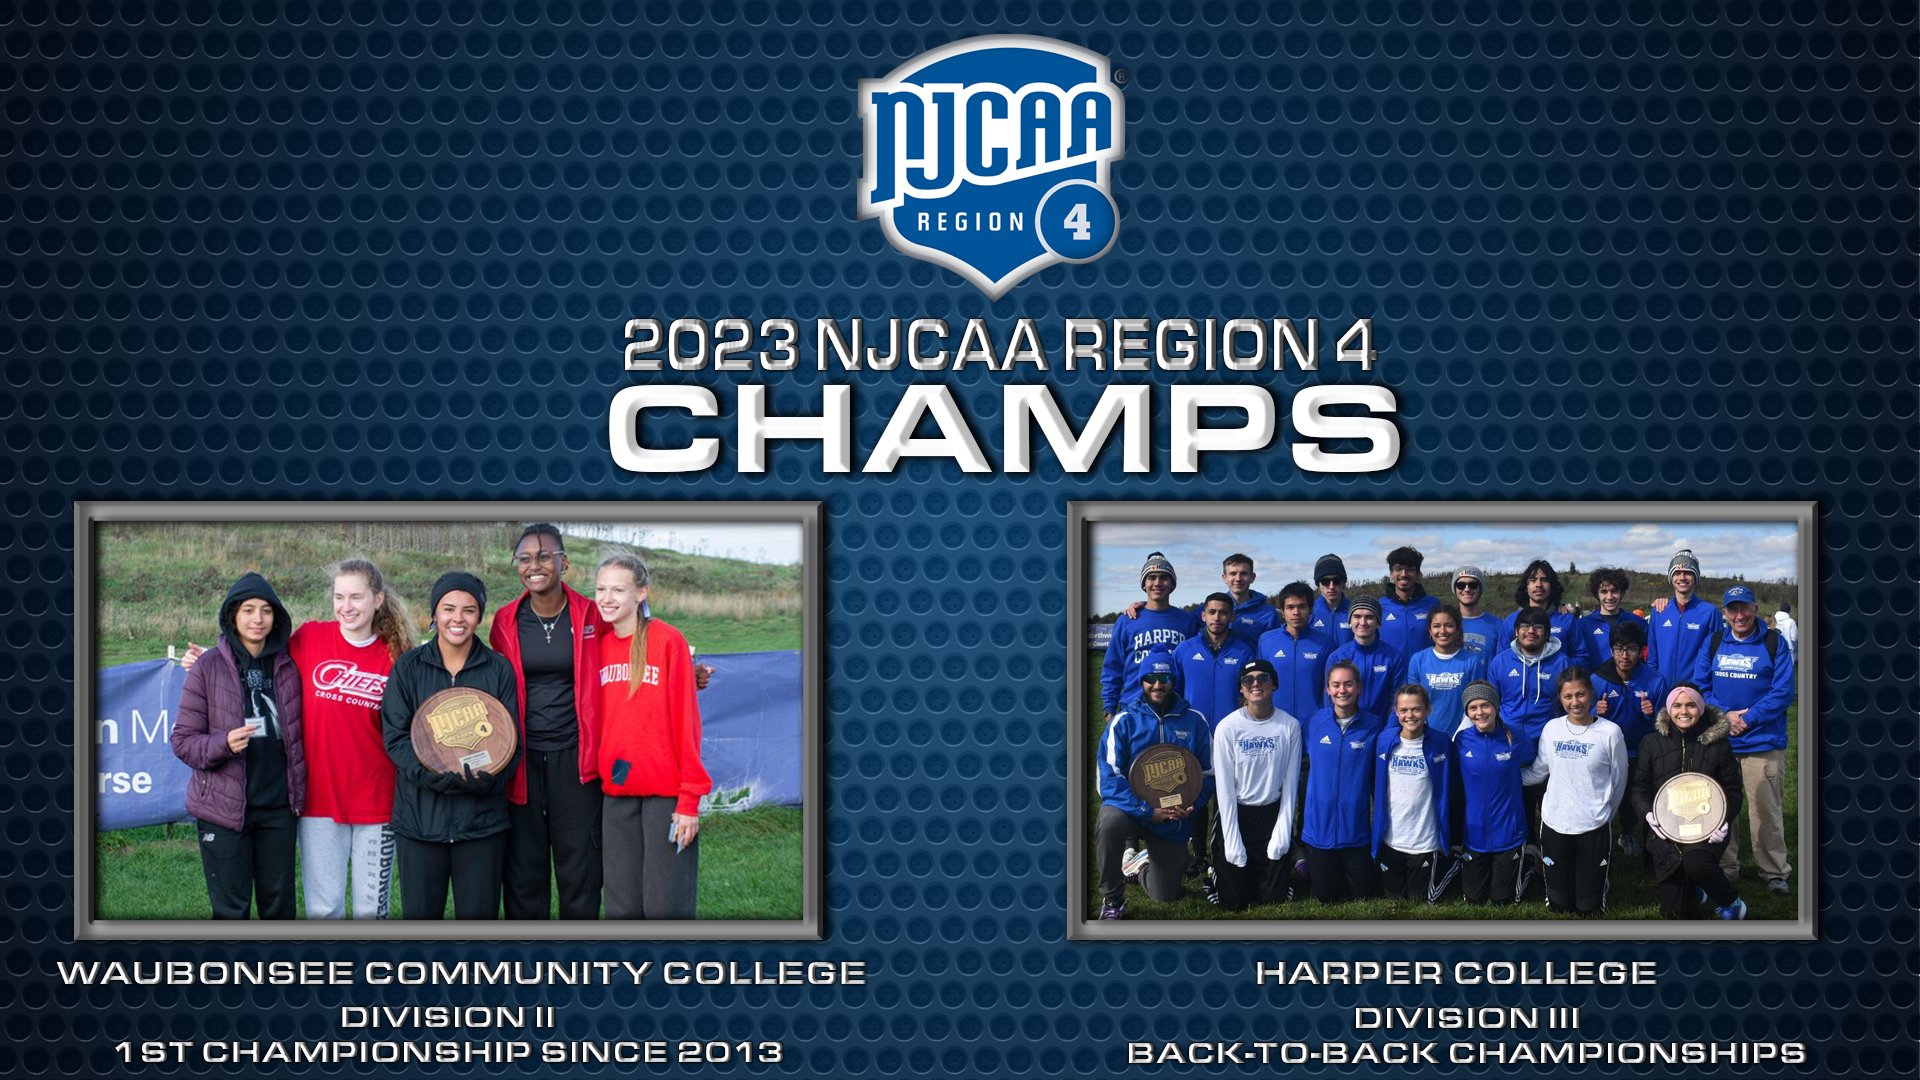 (Images courtesy of Waubonsee Community College & Harper College Athletics)